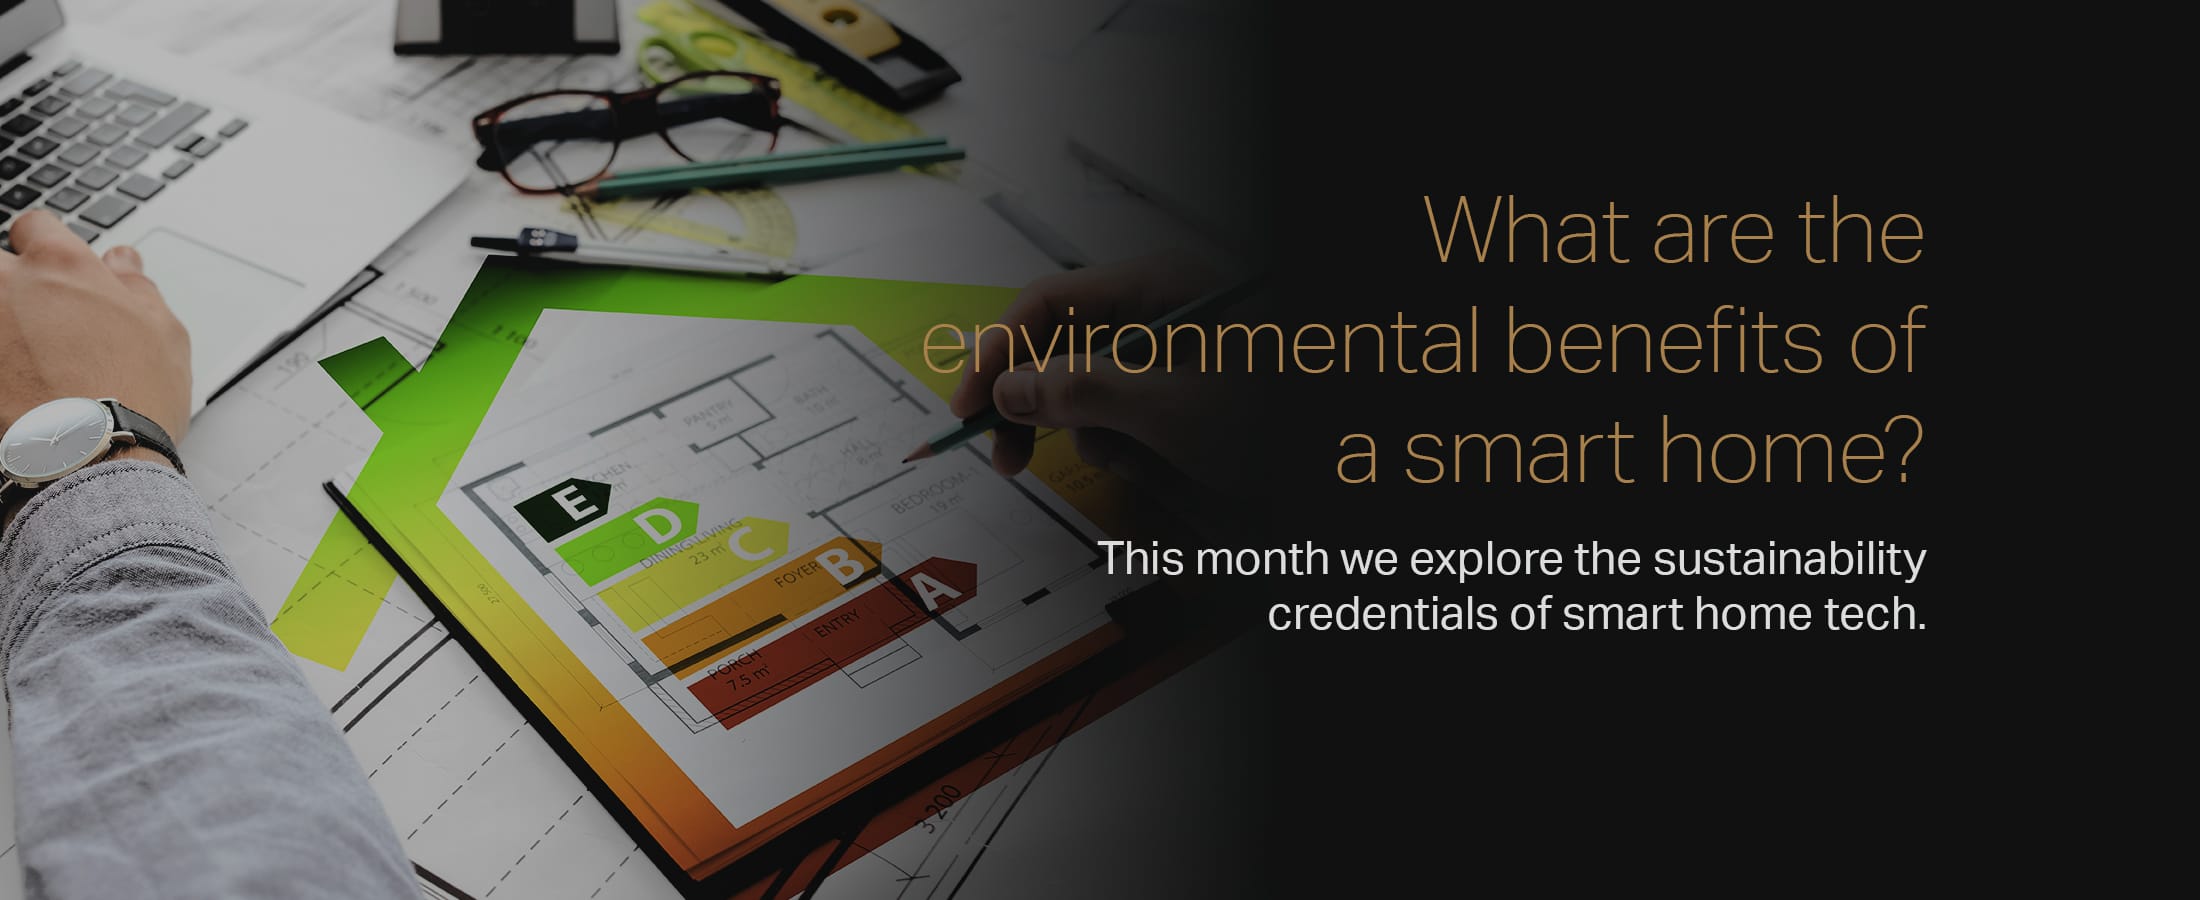 Smart homes and their environmental impact